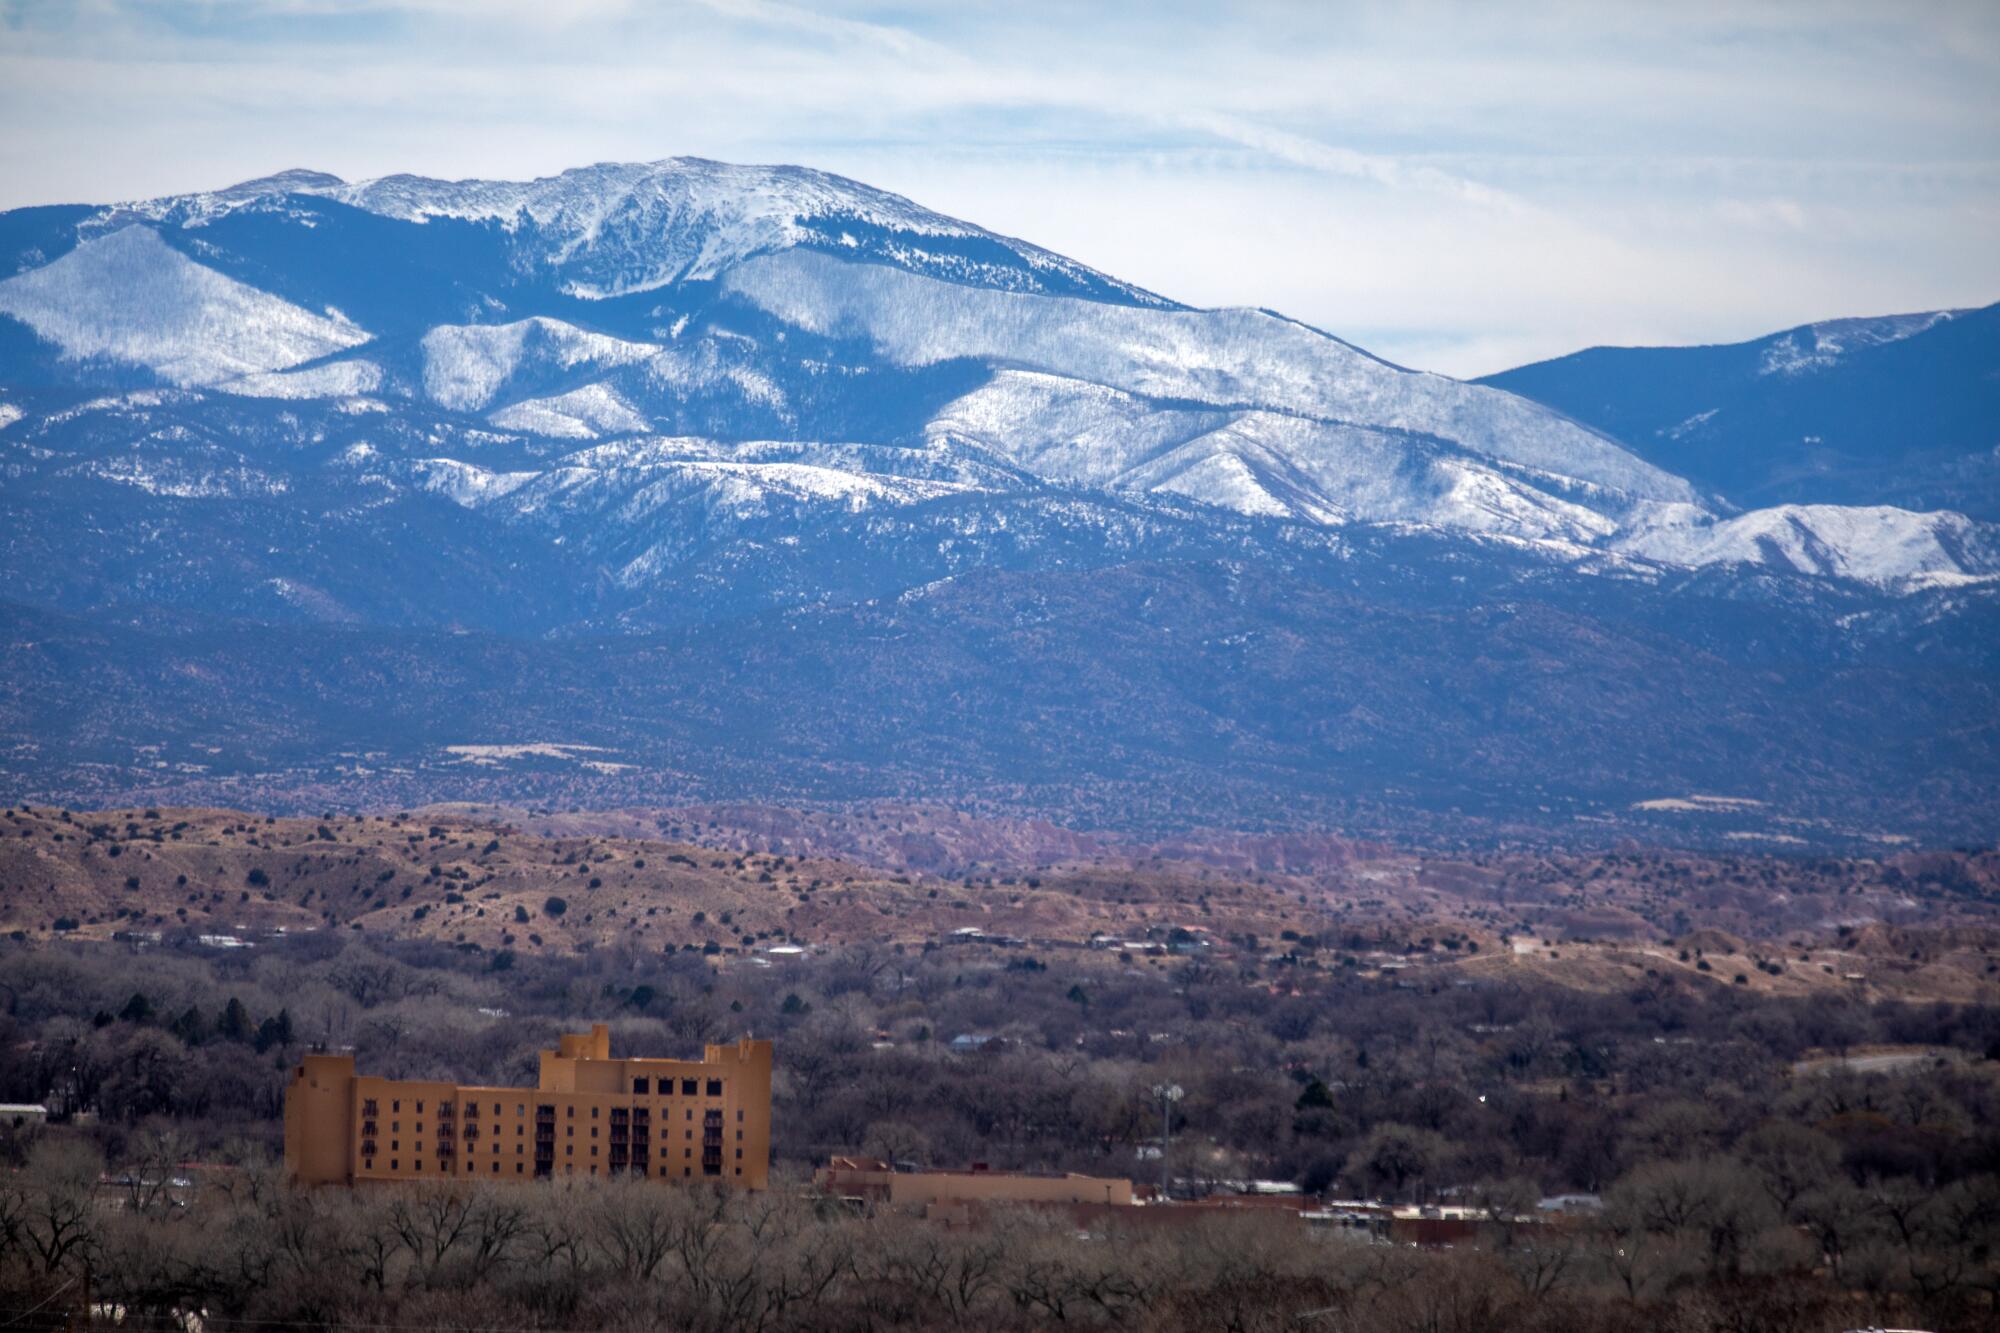 Espanola is located between Santa Fe and Taos, New Mexico on March 9, 2023, 